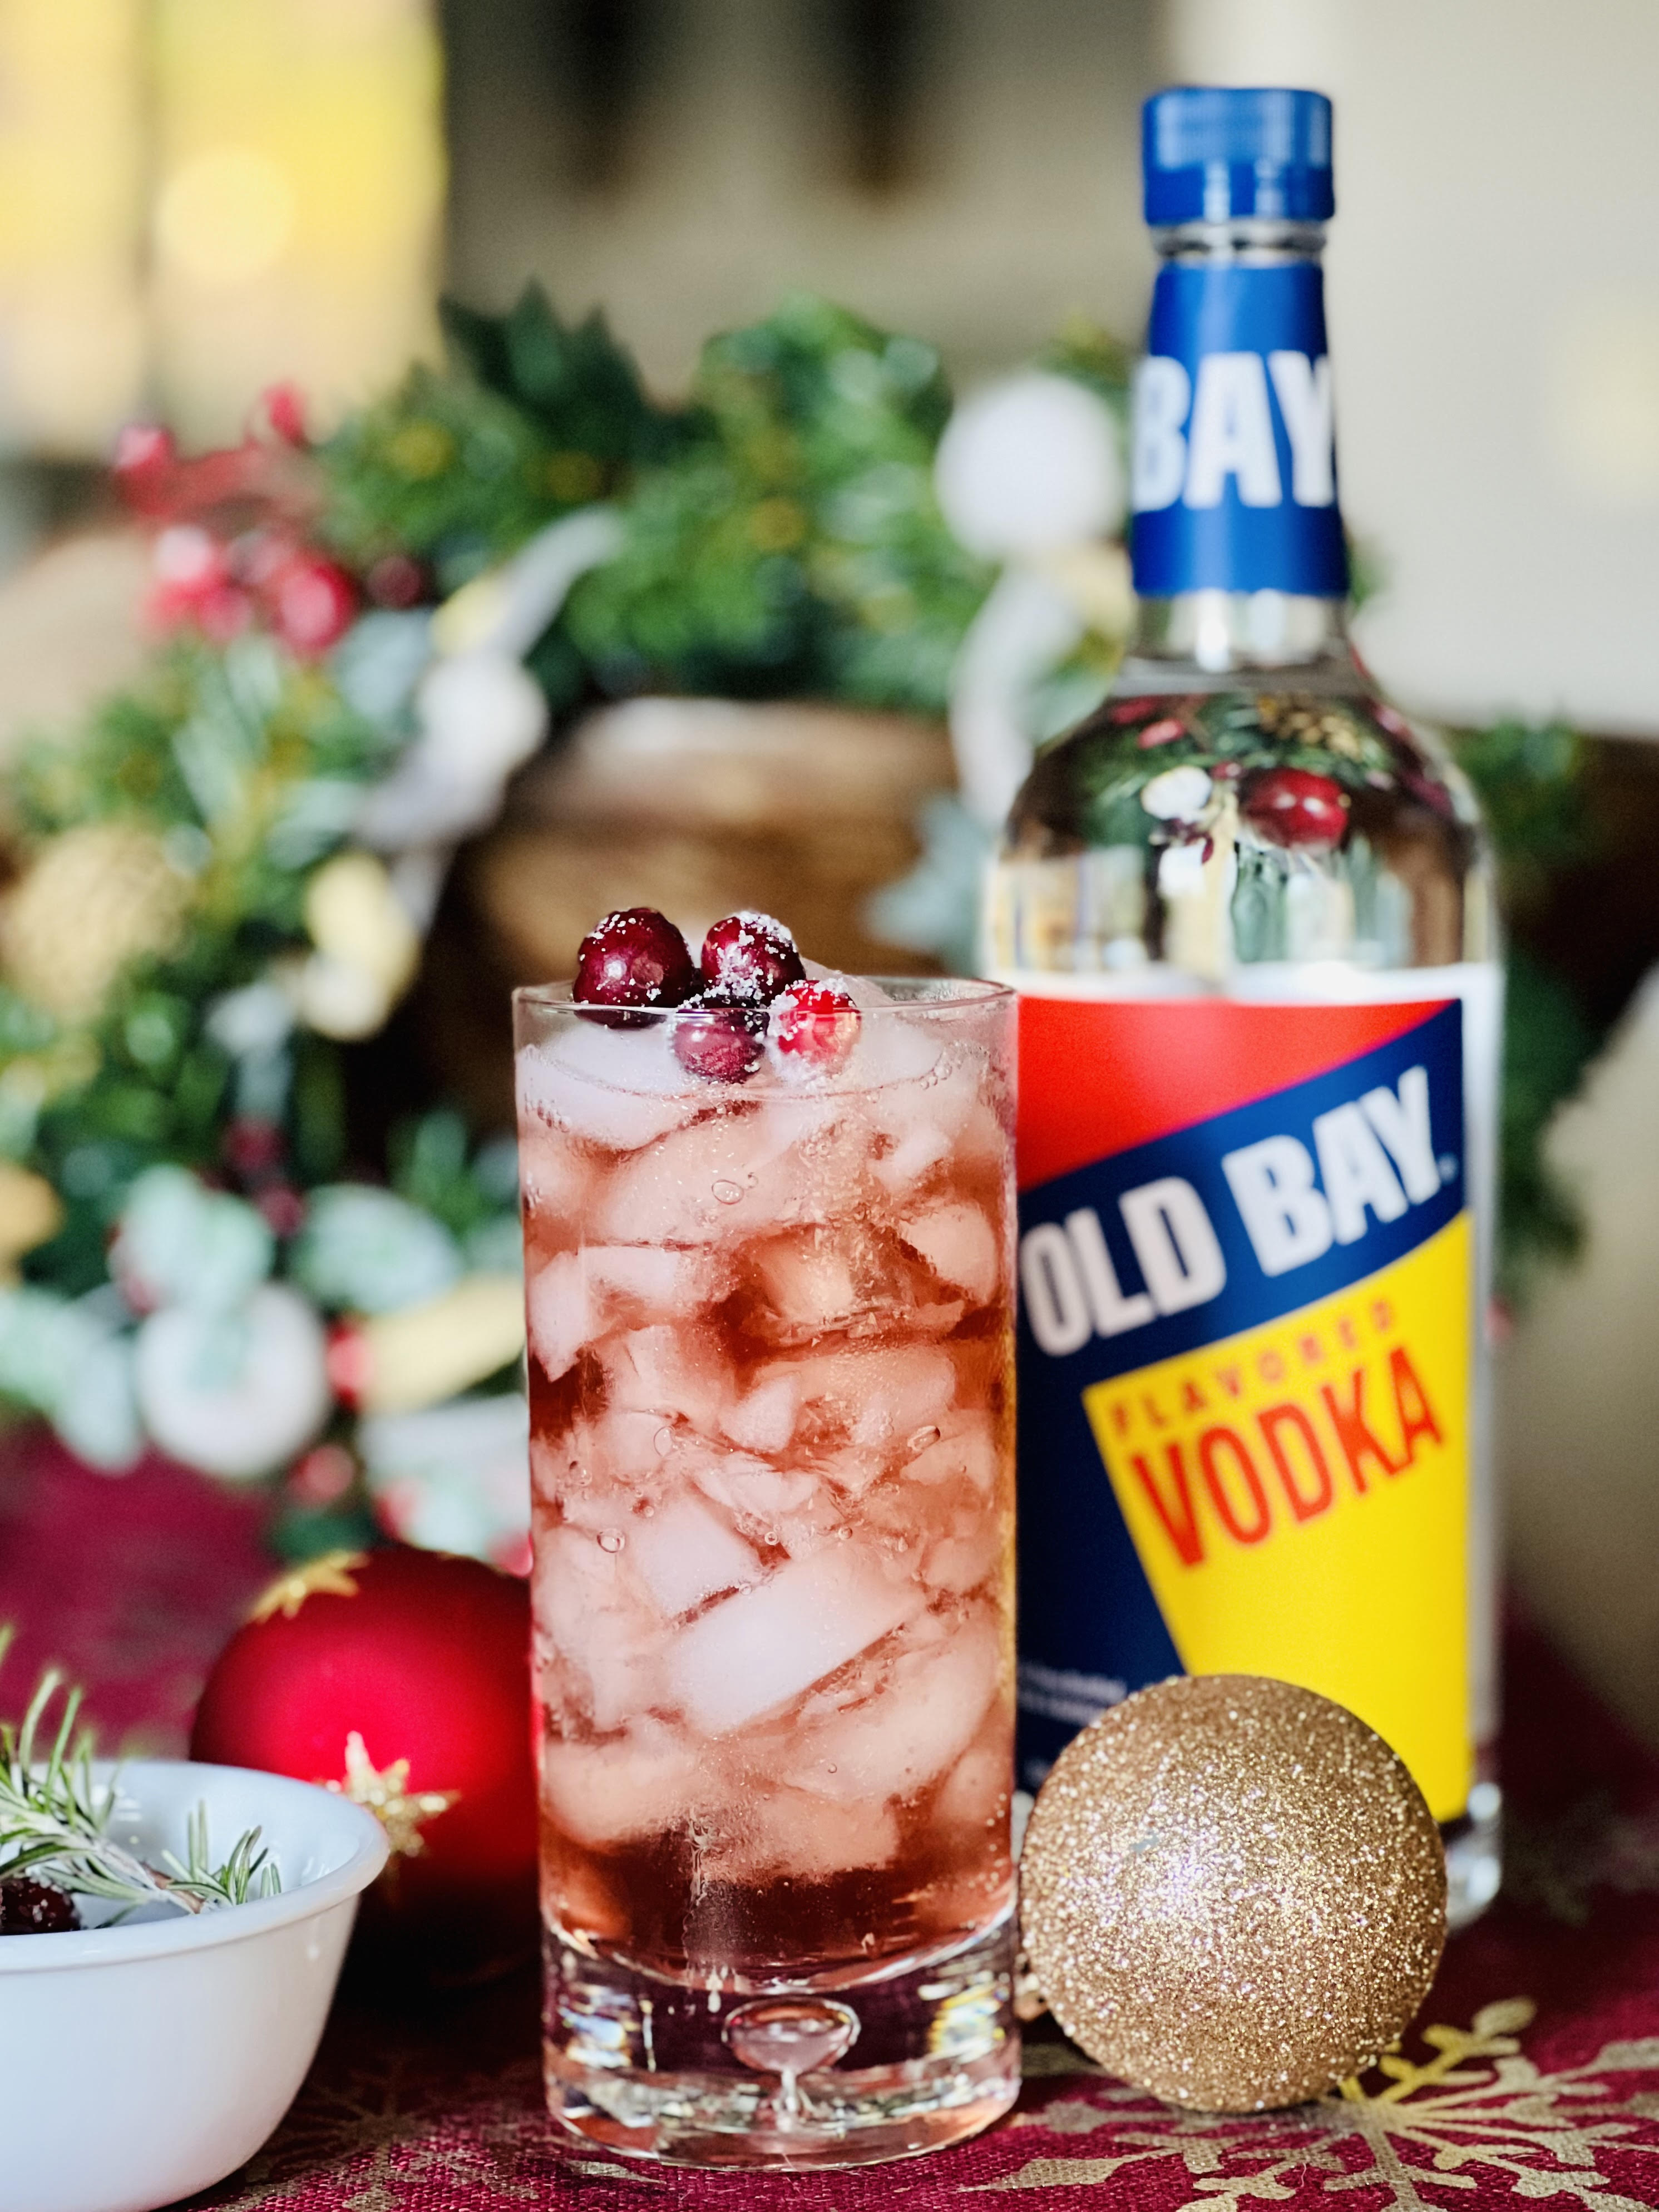 old bay vodka bottle with cranberry cocktail and Christmas decor